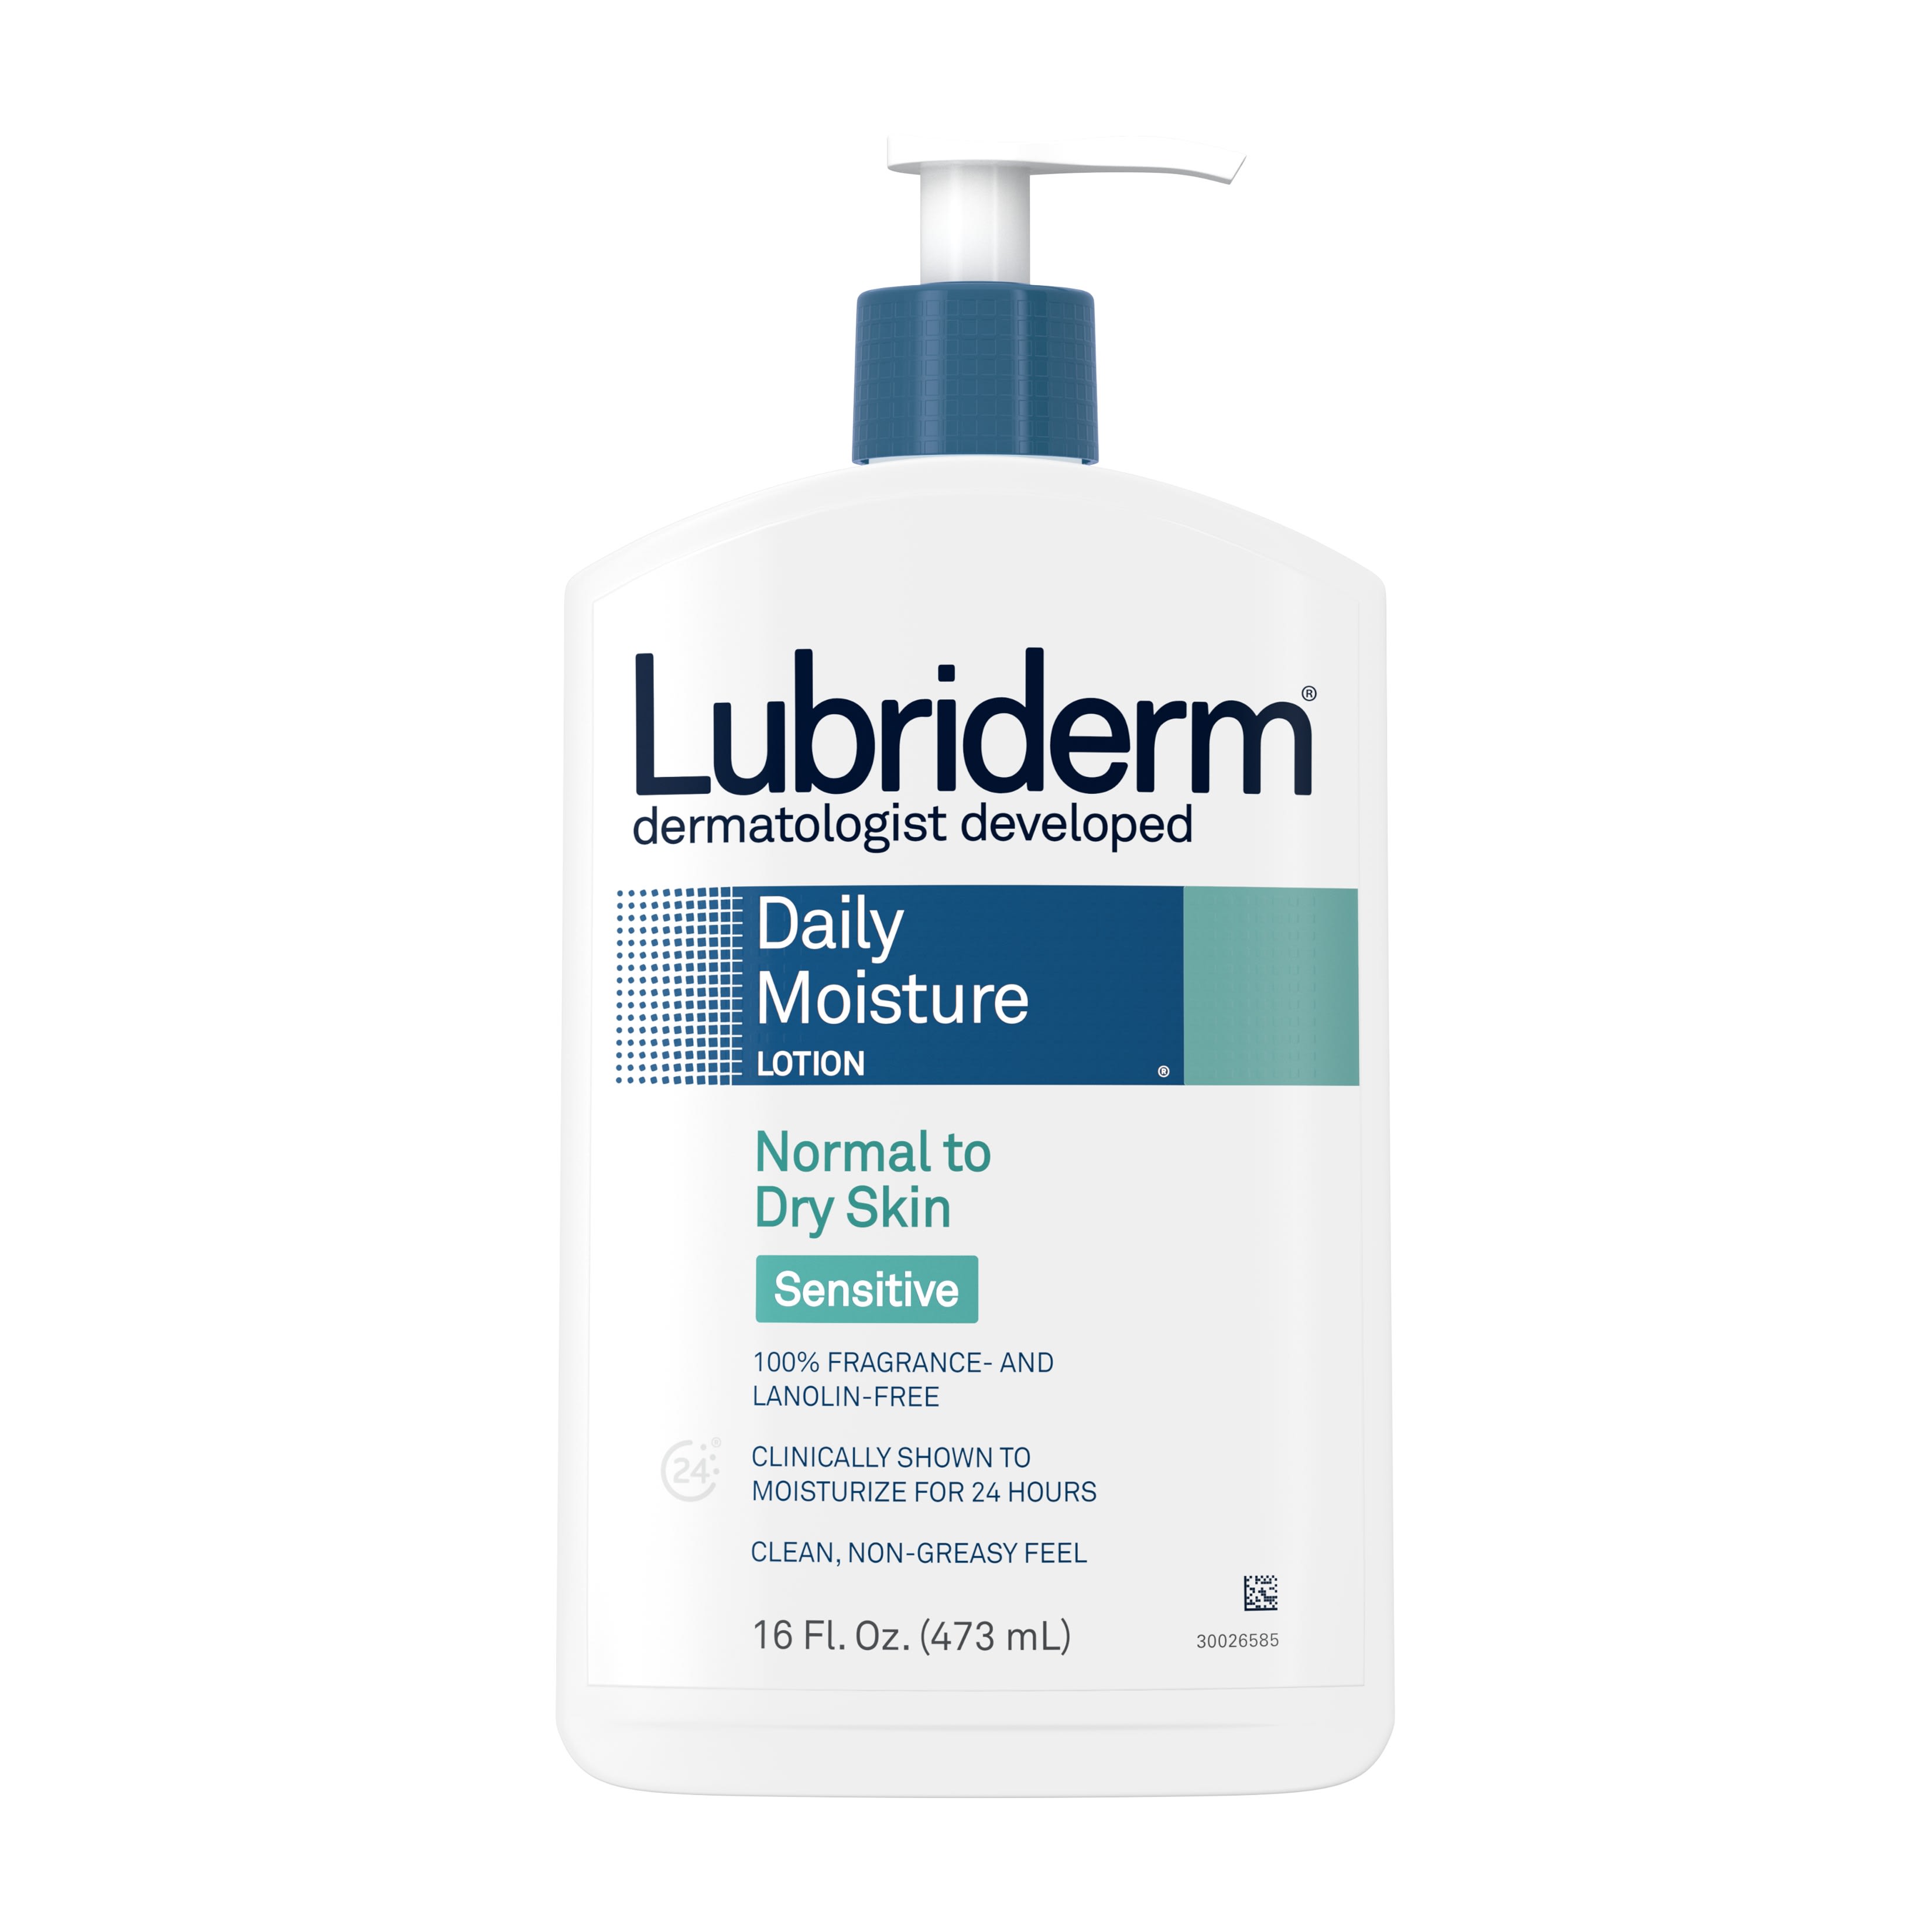 Lubriderm Daily Moisture Body Lotion for Dry Sensitive Skin, 16 fl. oz - image 1 of 10